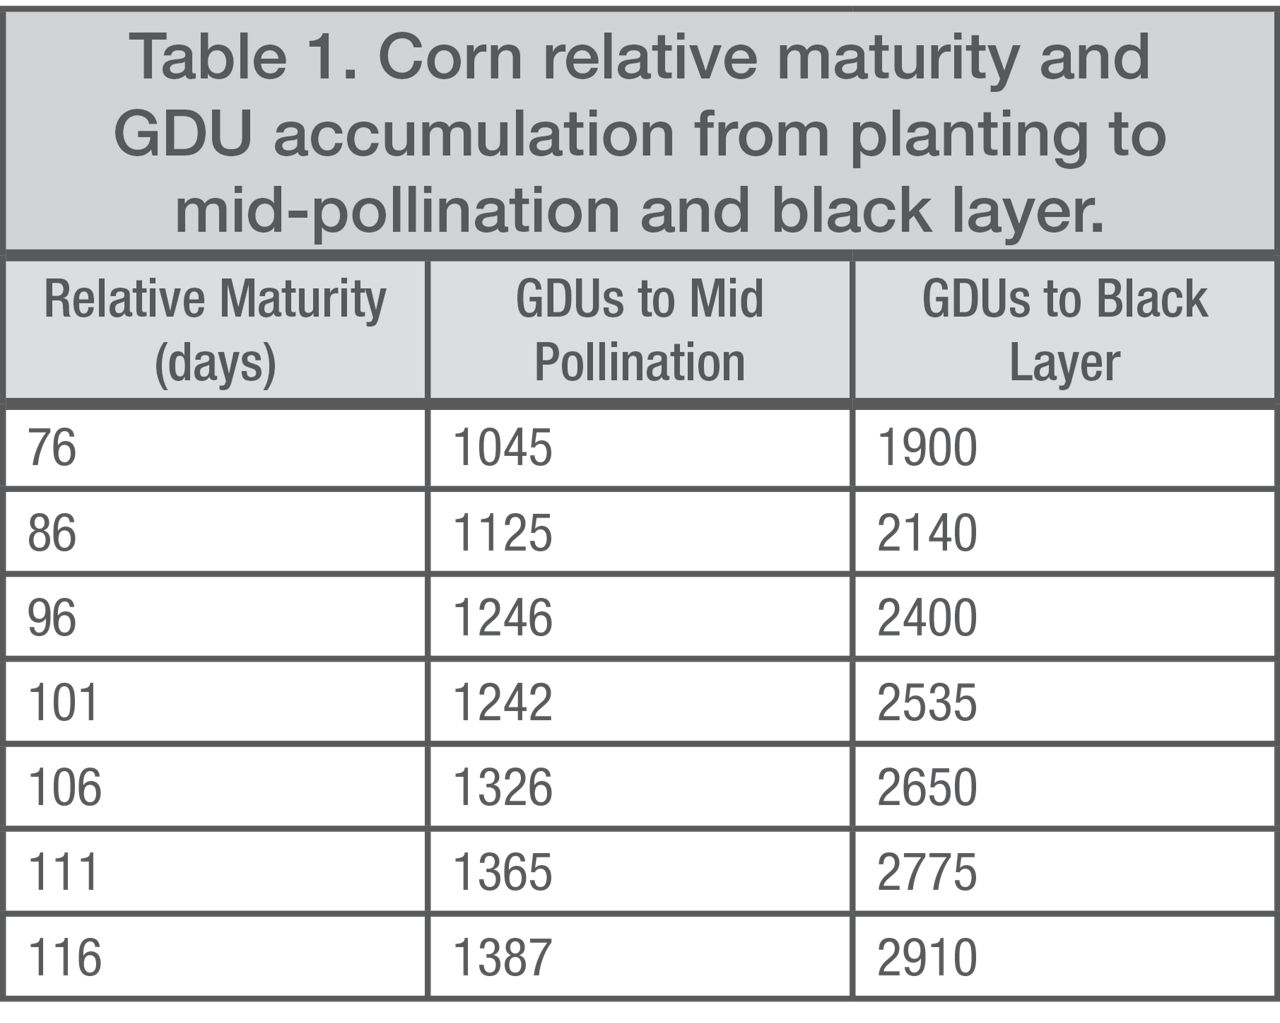 Corn relative maturity and GDU accumulation from planting to mid-pollination and black layer